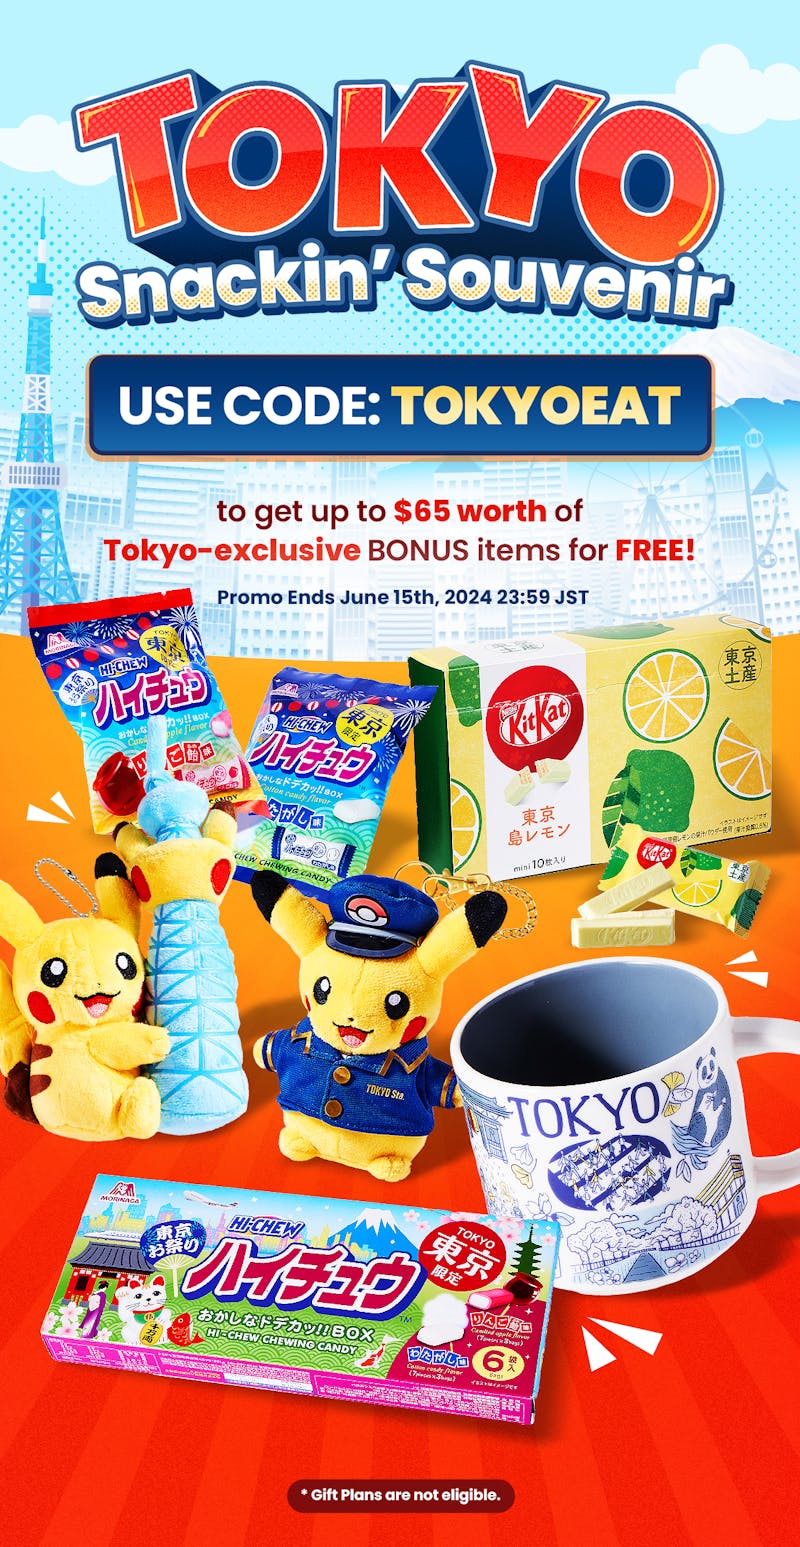 TokyoTreat's Tokyo Snackin' Souvenir promotion with featured Tokyo-exclusive items.